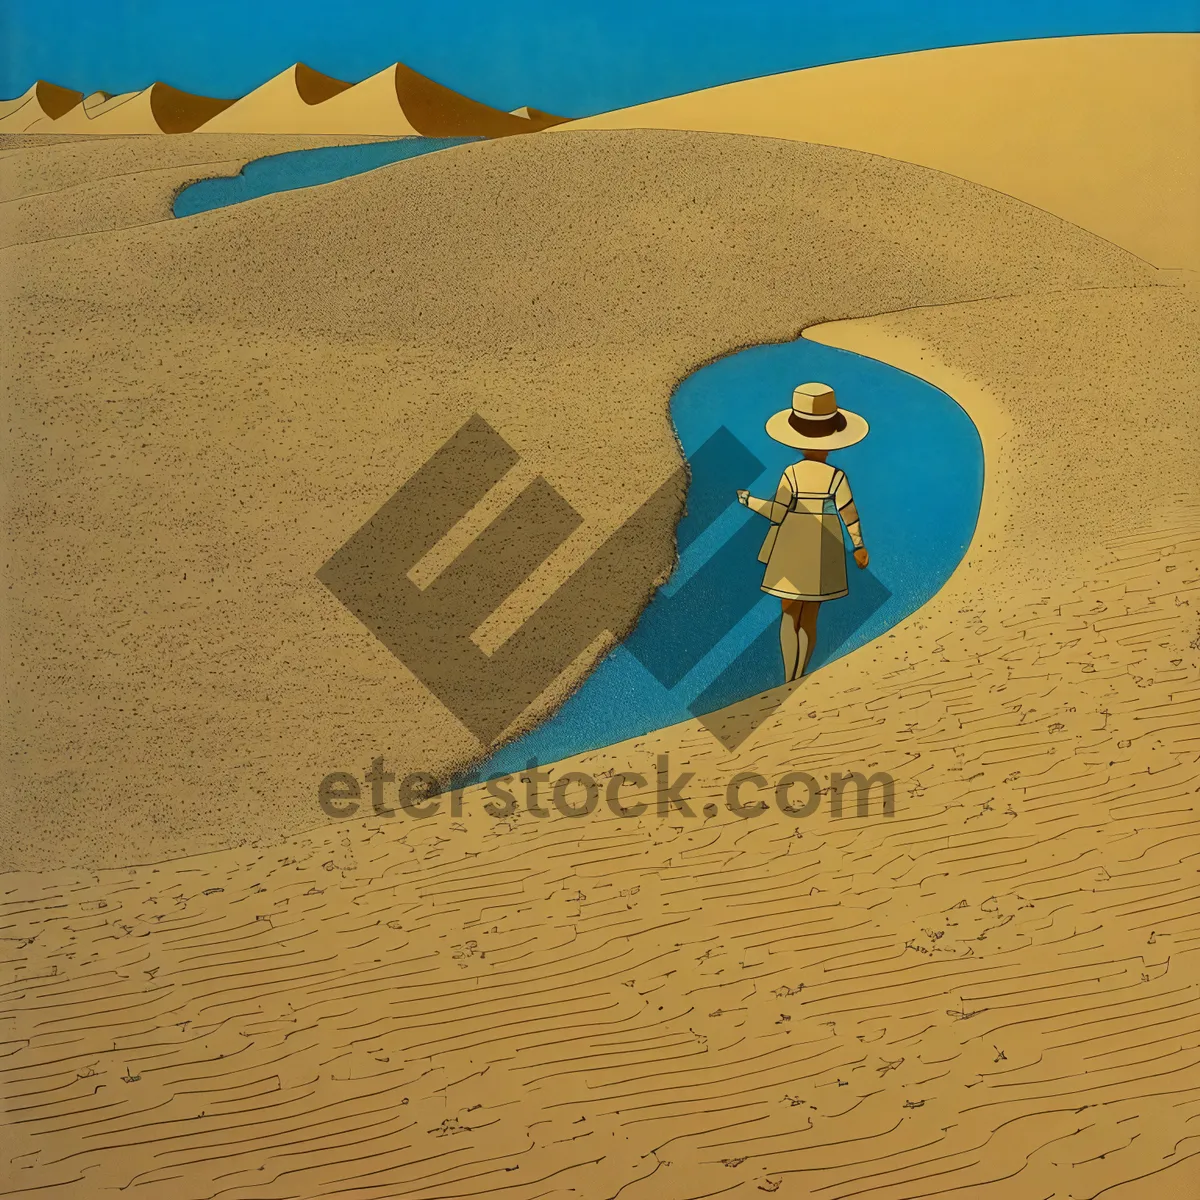 Picture of Sandy Dunes of Morocco's Arid Landscape